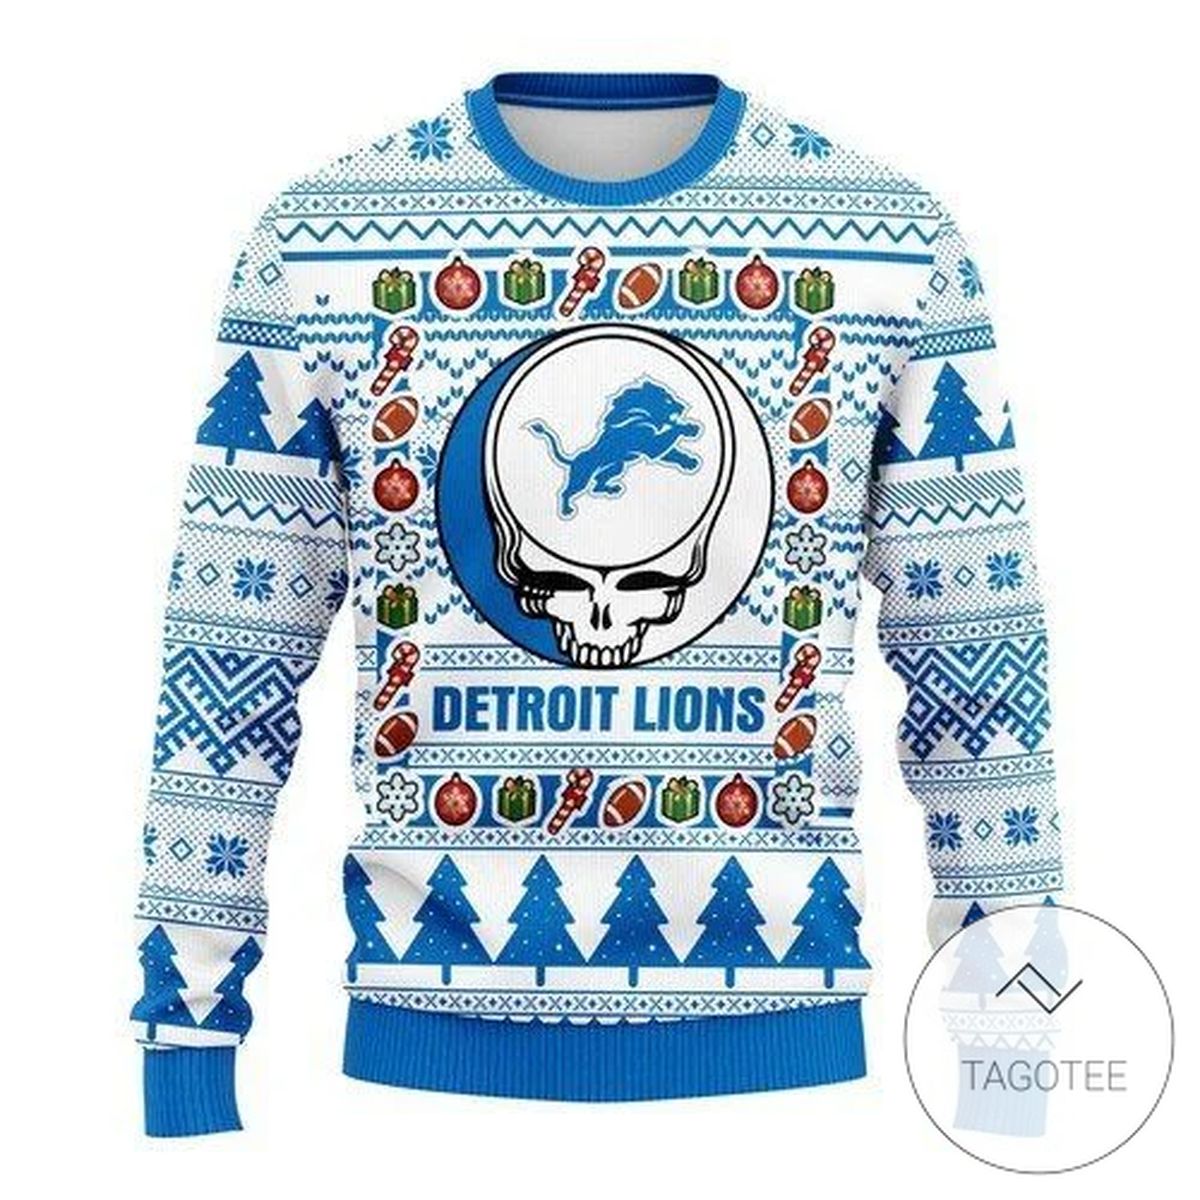 Detroit Lions Grateful Dead For Unisex Sweatshirt Knitted Ugly Christmas Sweater